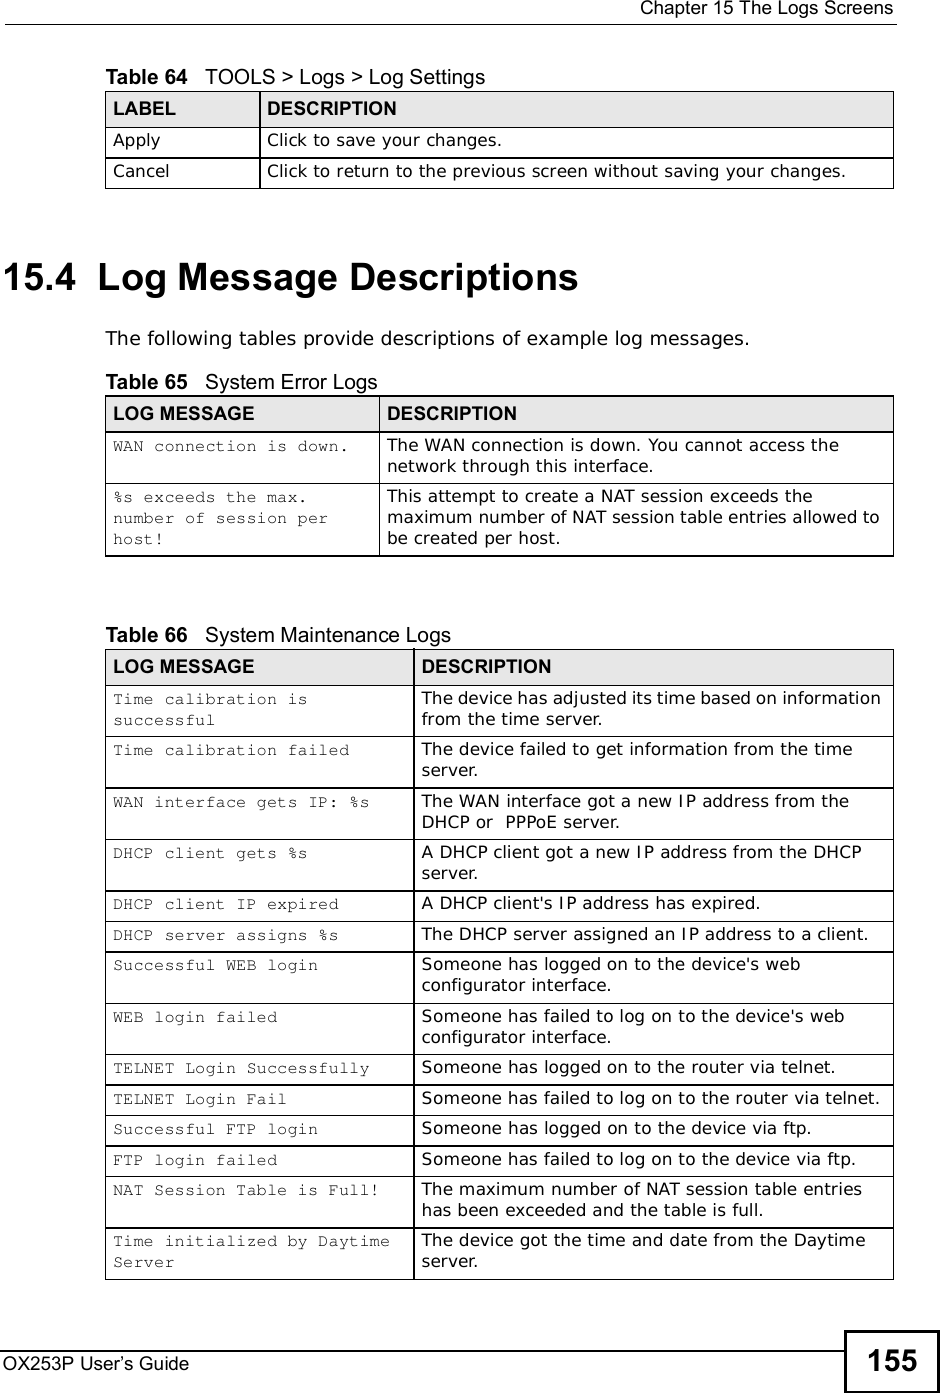  Chapter 15The Logs ScreensOX253P User’s Guide 15515.4  Log Message DescriptionsThe following tables provide descriptions of example log messages.Apply Click to save your changes.Cancel Click to return to the previous screen without saving your changes.Table 64   TOOLS &gt; Logs &gt; Log SettingsLABEL DESCRIPTIONTable 65   System Error LogsLOG MESSAGE DESCRIPTIONWAN connection is down. The WAN connection is down. You cannot access the network through this interface.%s exceeds the max. number of session per host!This attempt to create a NAT session exceeds the maximum number of NAT session table entries allowed to be created per host.Table 66   System Maintenance LogsLOG MESSAGE DESCRIPTIONTime calibration is successful The device has adjusted its time based on information from the time server.Time calibration failed The device failed to get information from the time server.WAN interface gets IP: %s The WAN interface got a new IP address from the DHCP or  PPPoE server.DHCP client gets %s A DHCP client got a new IP address from the DHCP server.DHCP client IP expired A DHCP client&apos;s IP address has expired.DHCP server assigns %s The DHCP server assigned an IP address to a client.Successful WEB login Someone has logged on to the device&apos;s web configurator interface.WEB login failed Someone has failed to log on to the device&apos;s web configurator interface.TELNET Login Successfully Someone has logged on to the router via telnet.TELNET Login Fail Someone has failed to log on to the router via telnet.Successful FTP login Someone has logged on to the device via ftp.FTP login failed Someone has failed to log on to the device via ftp.NAT Session Table is Full! The maximum number of NAT session table entries has been exceeded and the table is full.Time initialized by Daytime Server The device got the time and date from the Daytime server.